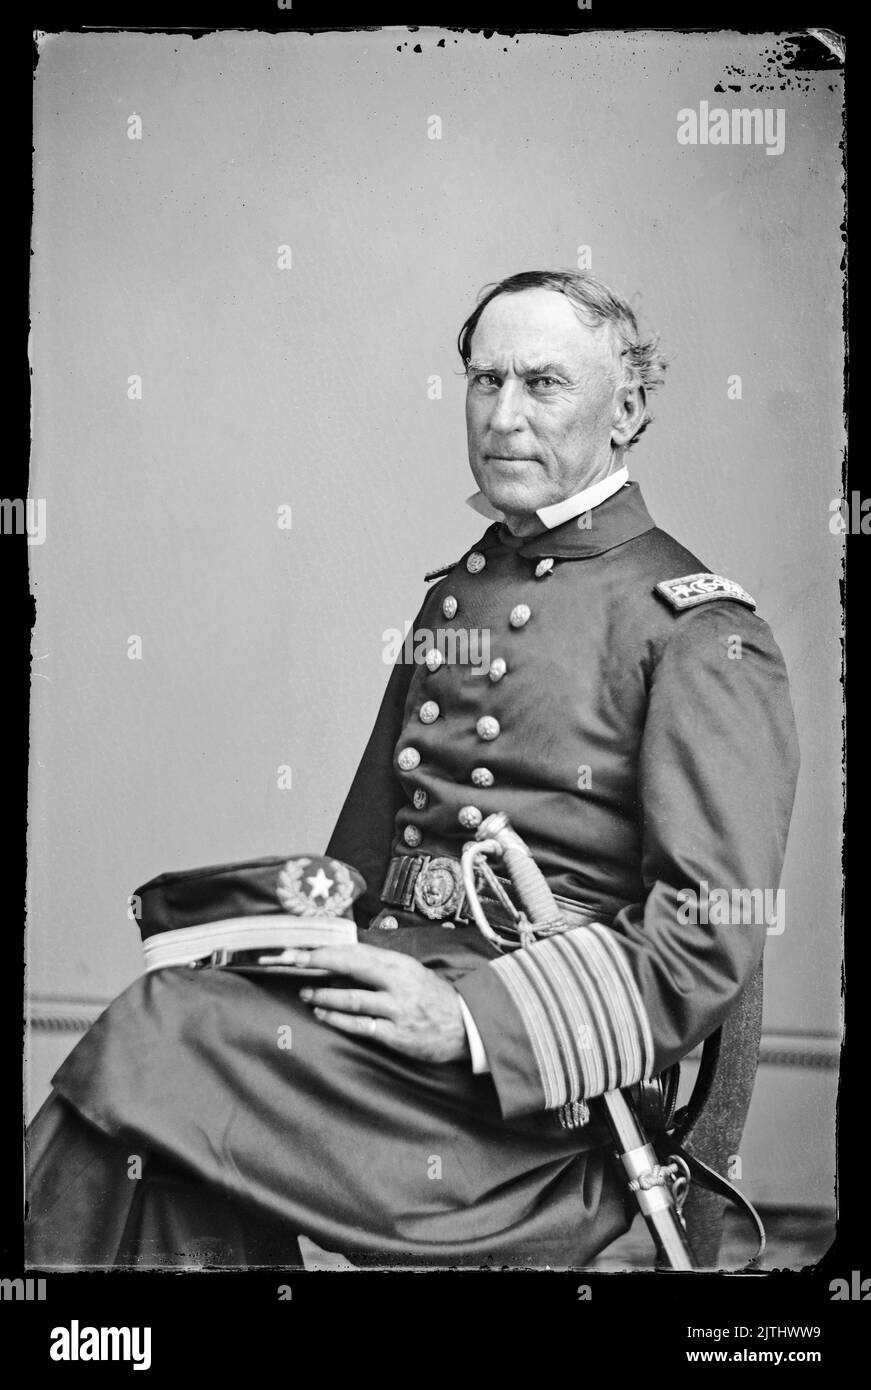 David Glasgow Farragut (1801-1870), was a flag officer of the United States Navy during the American Civil War, portrait photograph by Mathew Brady Studio, 1860-1870 Stock Photo